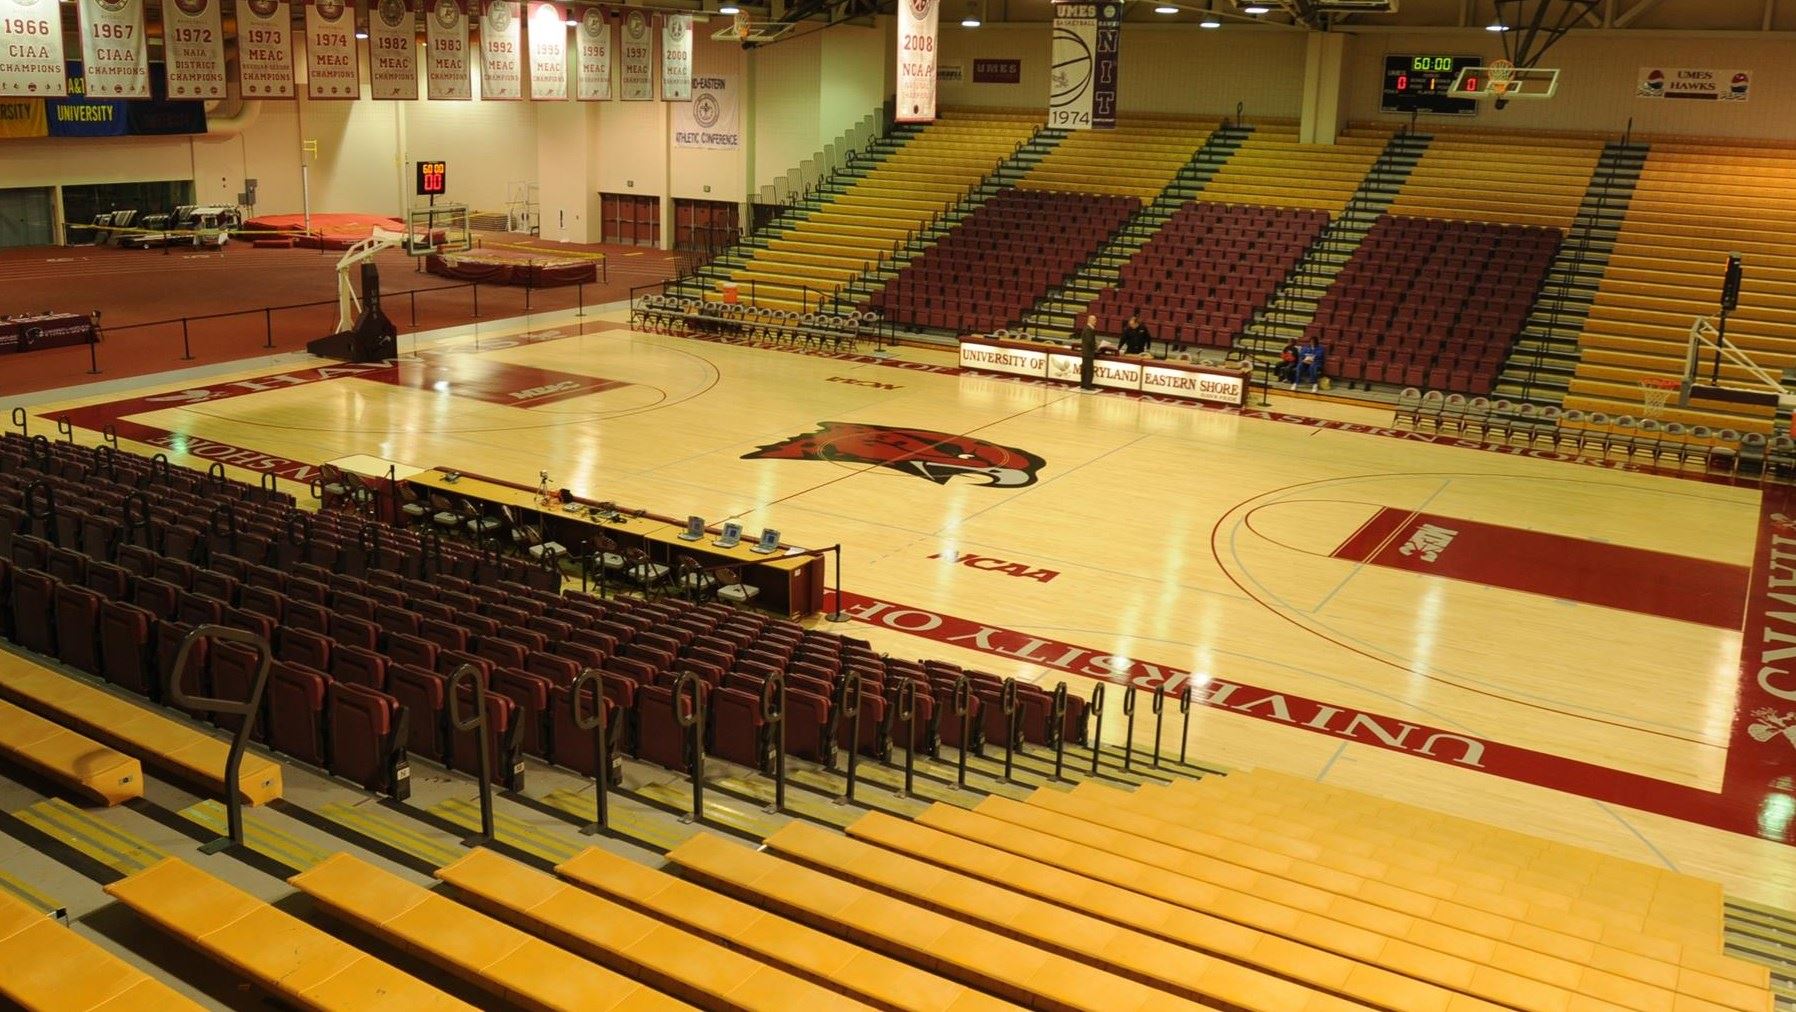 Hyche Center at Maryland Eastern Shore